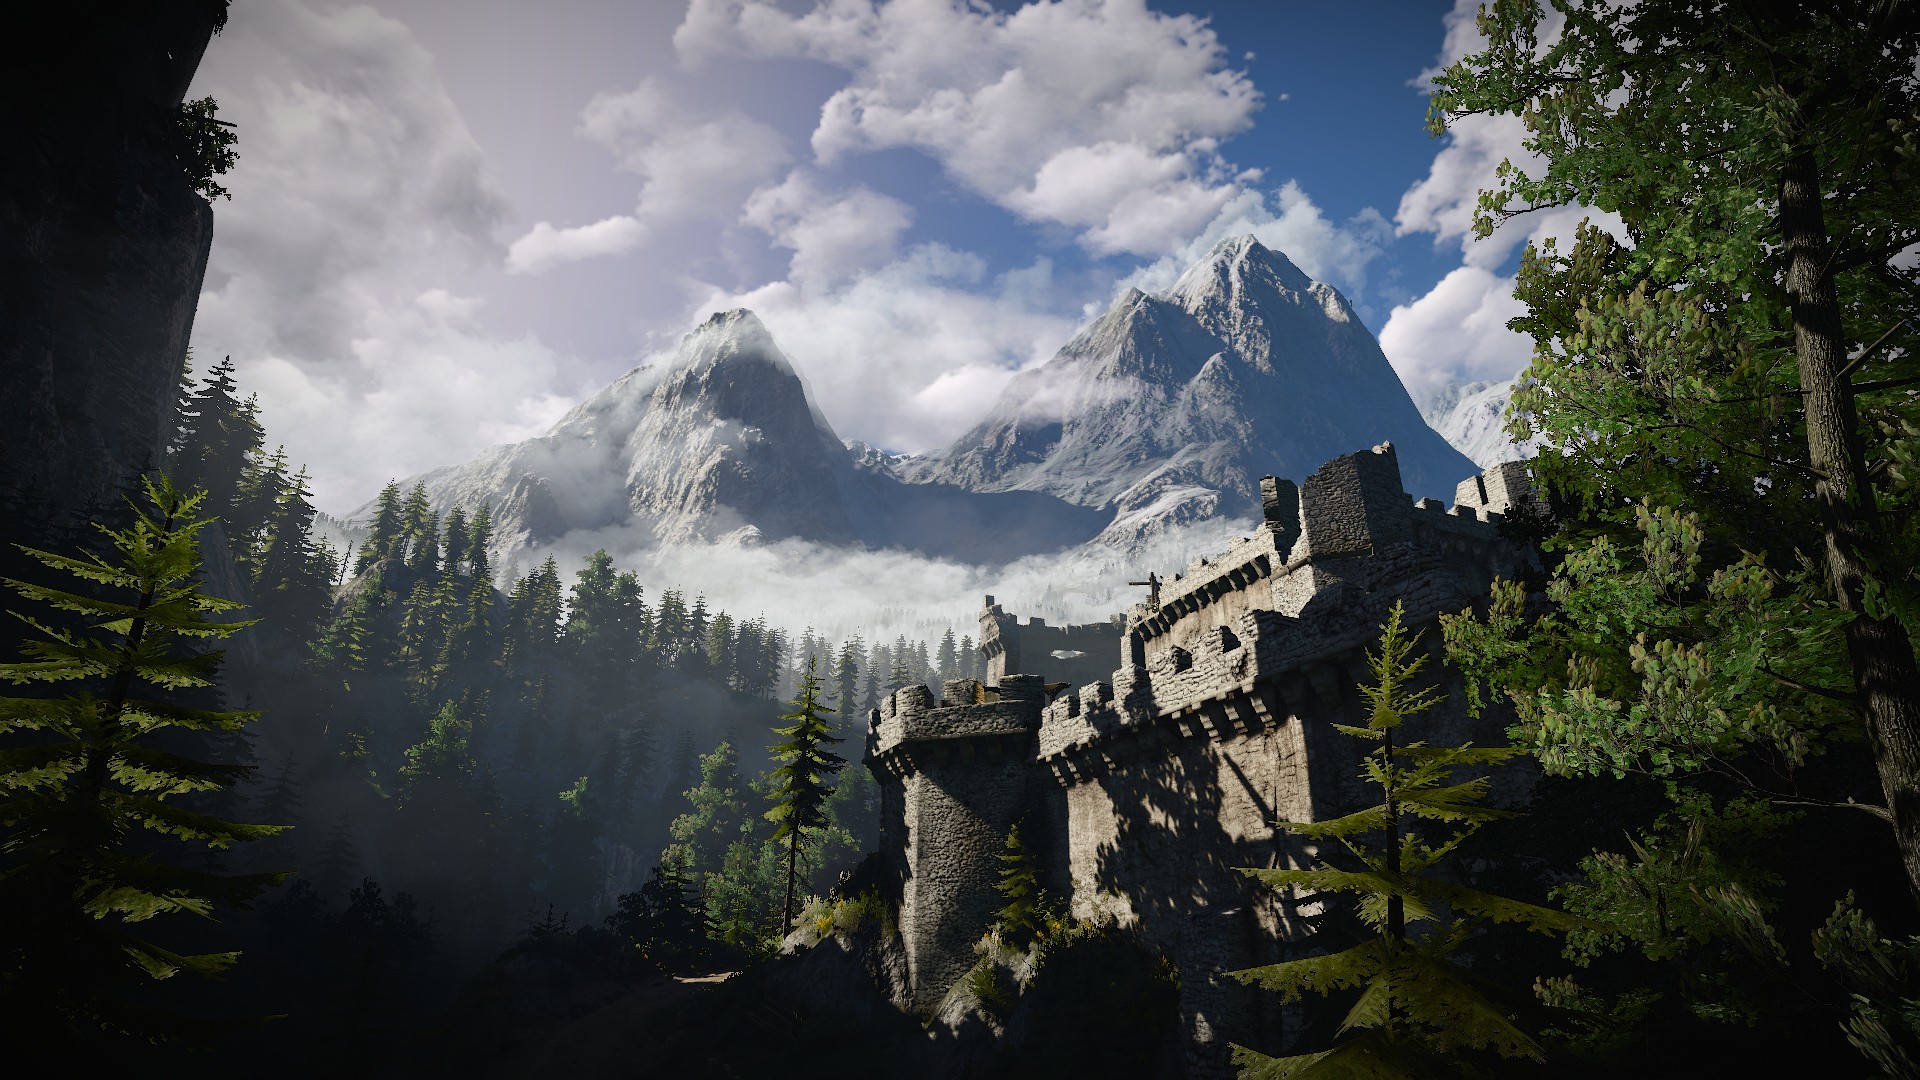 The Witcher 3: Wild Hunt, Kaer Morhen, The Witcher Wallpaper